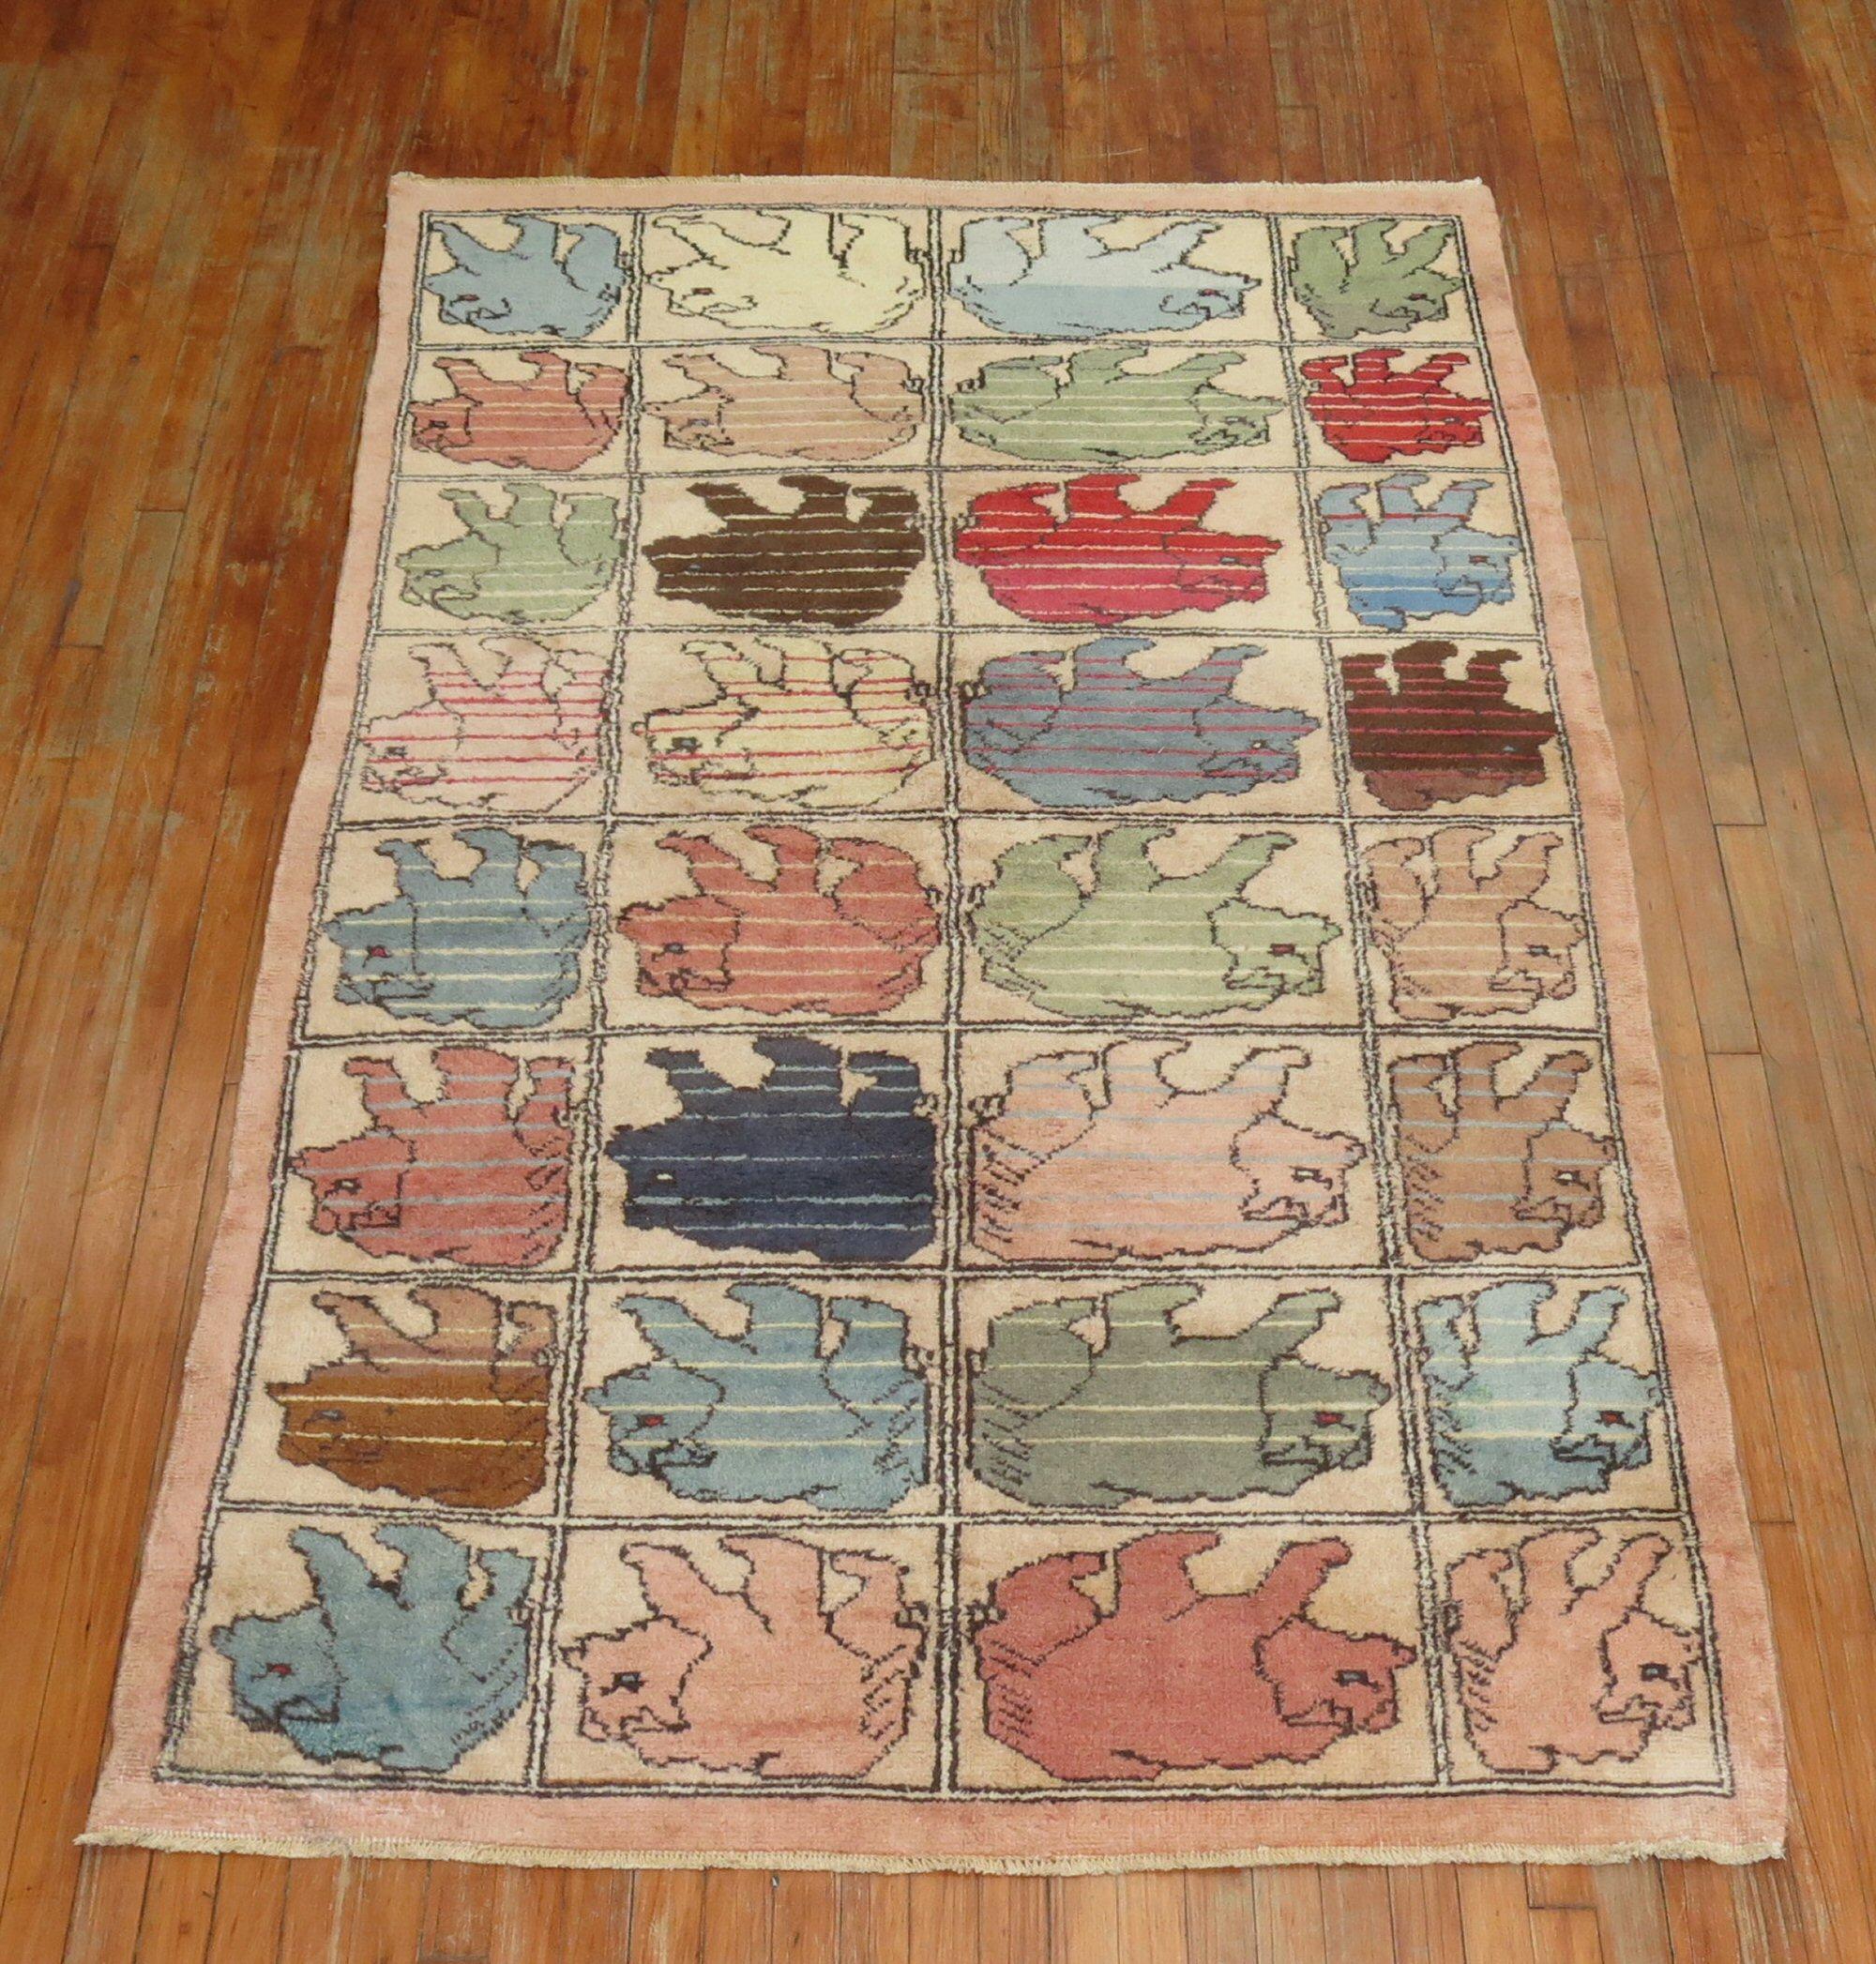 A third quarter of the 20th century Turkish rug depicting 32 different bears on a grid like pattern. Pretty cool!

Measures: 4'9